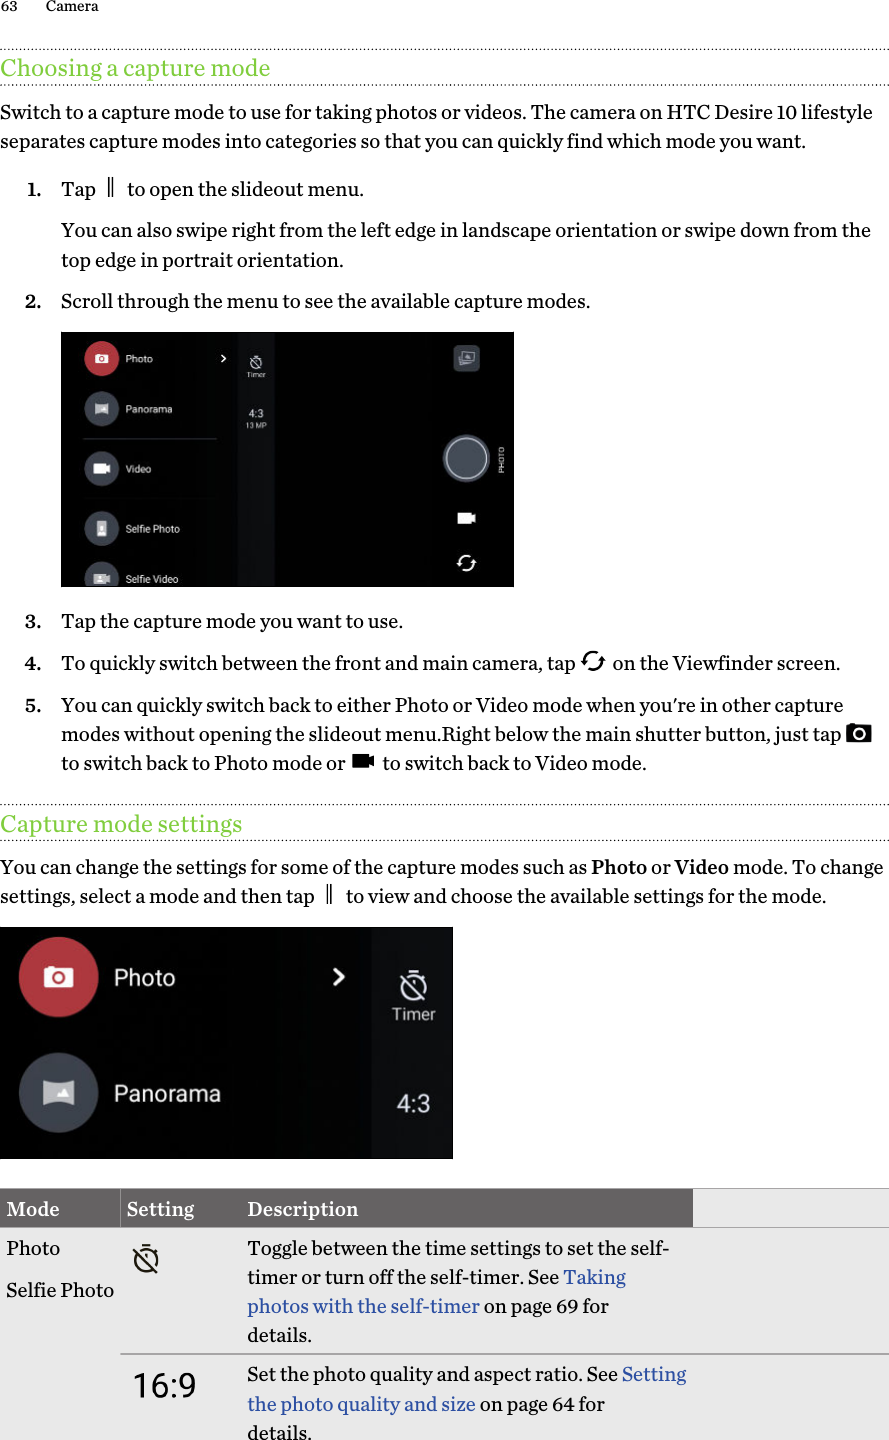 Choosing a capture modeSwitch to a capture mode to use for taking photos or videos. The camera on HTC Desire 10 lifestyleseparates capture modes into categories so that you can quickly find which mode you want.1. Tap   to open the slideout menu.You can also swipe right from the left edge in landscape orientation or swipe down from the top edge in portrait orientation.2. Scroll through the menu to see the available capture modes.3. Tap the capture mode you want to use.4. To quickly switch between the front and main camera, tap   on the Viewfinder screen.5. You can quickly switch back to either Photo or Video mode when you&apos;re in other capture modes without opening the slideout menu.Right below the main shutter button, just tap to switch back to Photo mode or   to switch back to Video mode. Capture mode settingsYou can change the settings for some of the capture modes such as Photo or Video mode. To change settings, select a mode and then tap   to view and choose the available settings for the mode.Mode Setting DescriptionPhotoSelfie PhotoToggle between the time settings to set the self-timer or turn off the self-timer. See Taking photos with the self-timer on page 69 for details.Set the photo quality and aspect ratio. See Setting the photo quality and size on page 64 for details.63 Camera